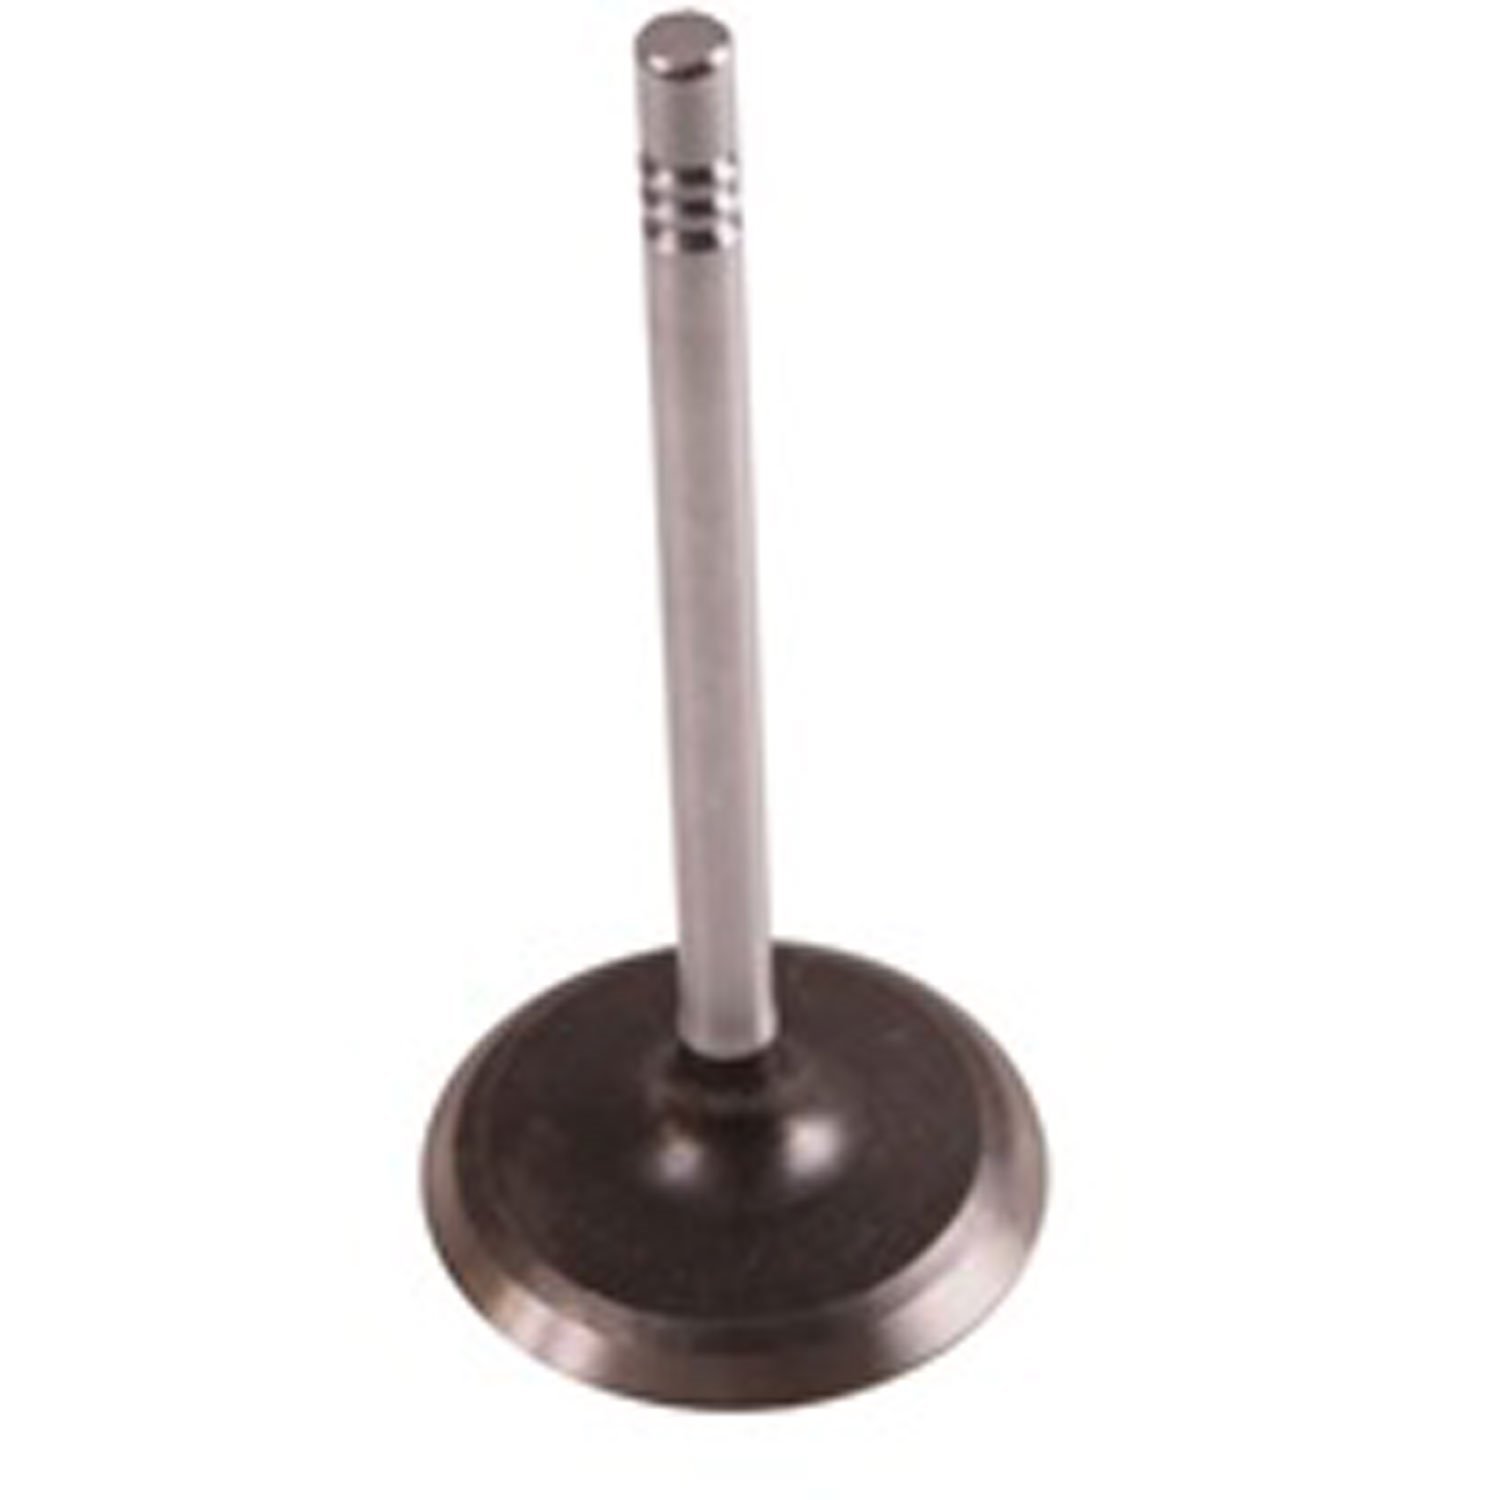 Intake Valve 3.8L 4.2L and 5.0L .015 inch Over 1972-1980 Models